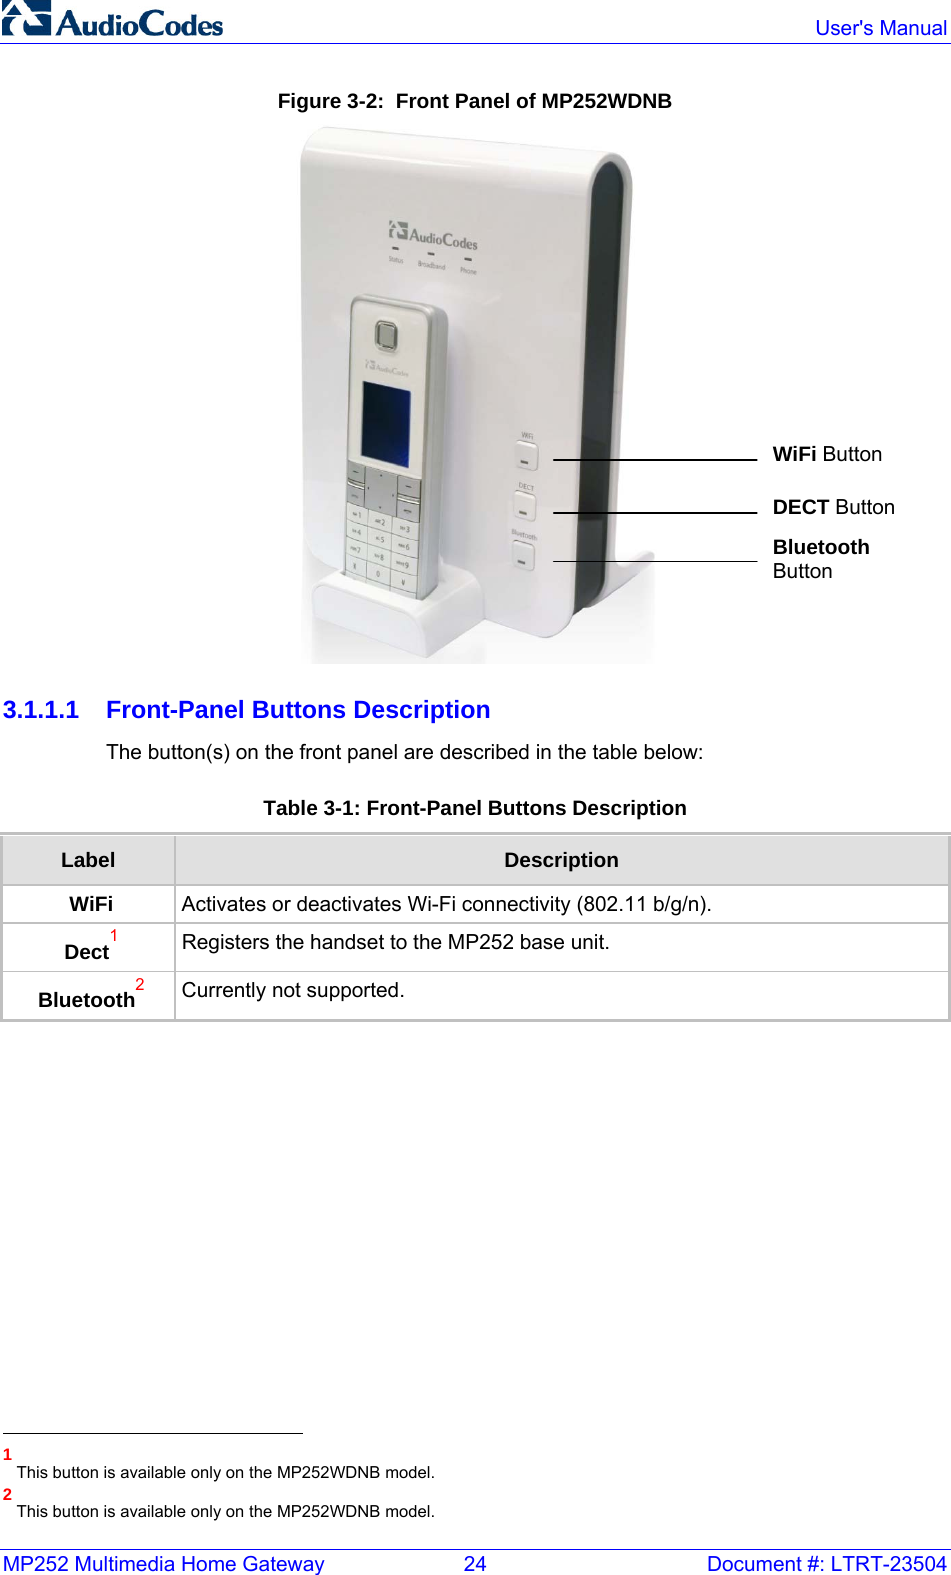 MP252 Multimedia Home Gateway  24  Document #: LTRT-23504  User&apos;s Manual Figure 3-2:  Front Panel of MP252WDNB  3.1.1.1  Front-Panel Buttons Description The button(s) on the front panel are described in the table below: Table 3-1: Front-Panel Buttons Description Label  Description WiFi  Activates or deactivates Wi-Fi connectivity (802.11 b/g/n).  Dect1 Registers the handset to the MP252 base unit. Bluetooth2 Currently not supported.                                                        1 This button is available only on the MP252WDNB model. 2 This button is available only on the MP252WDNB model. WiFi Button DECT Button Bluetooth Button 